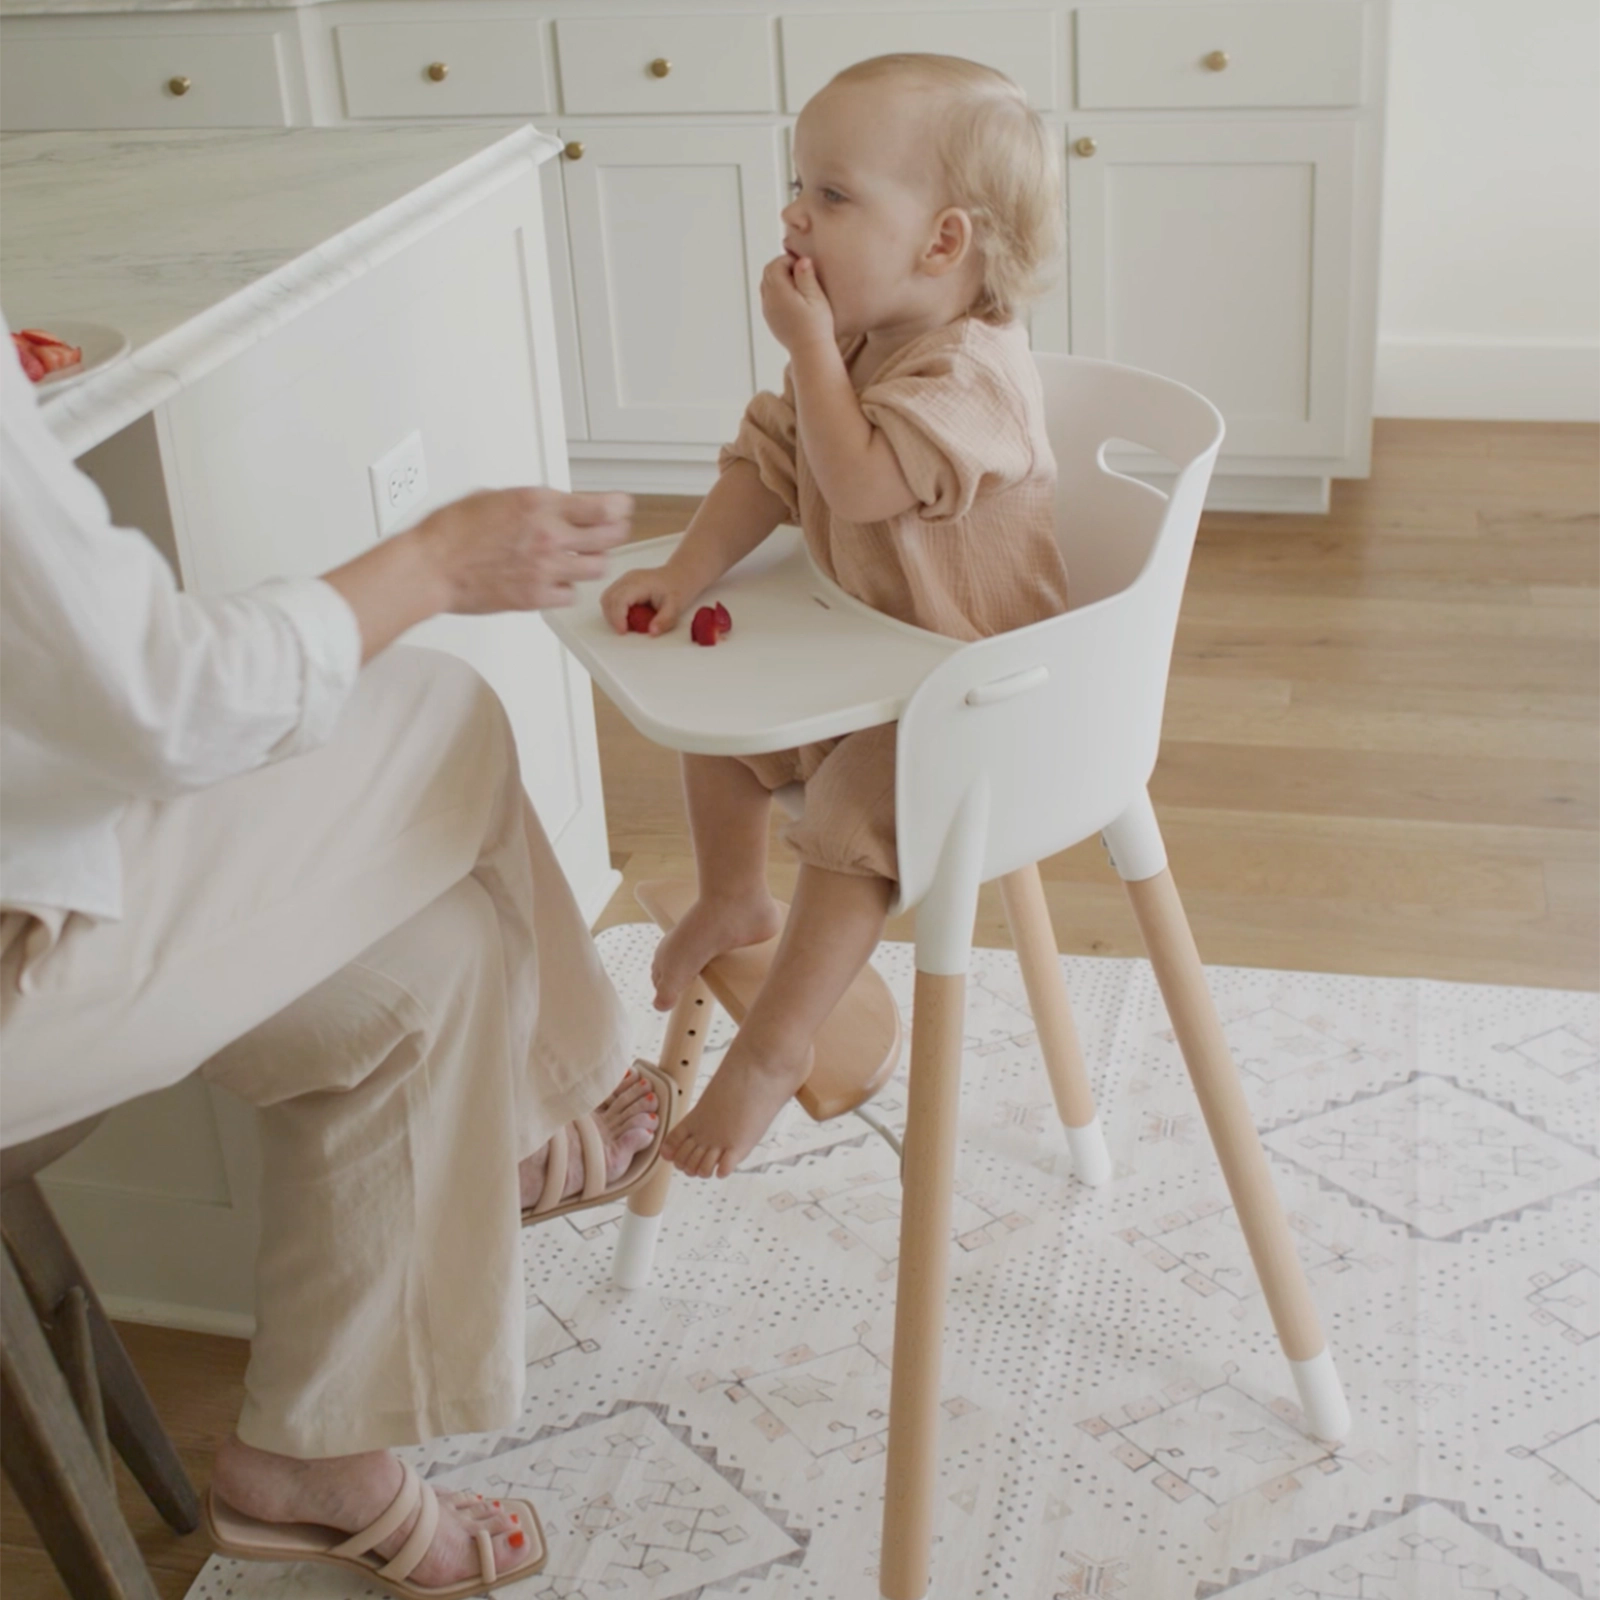 Neutral boho baby highchair mat shown in kitchen with mom feeding baby